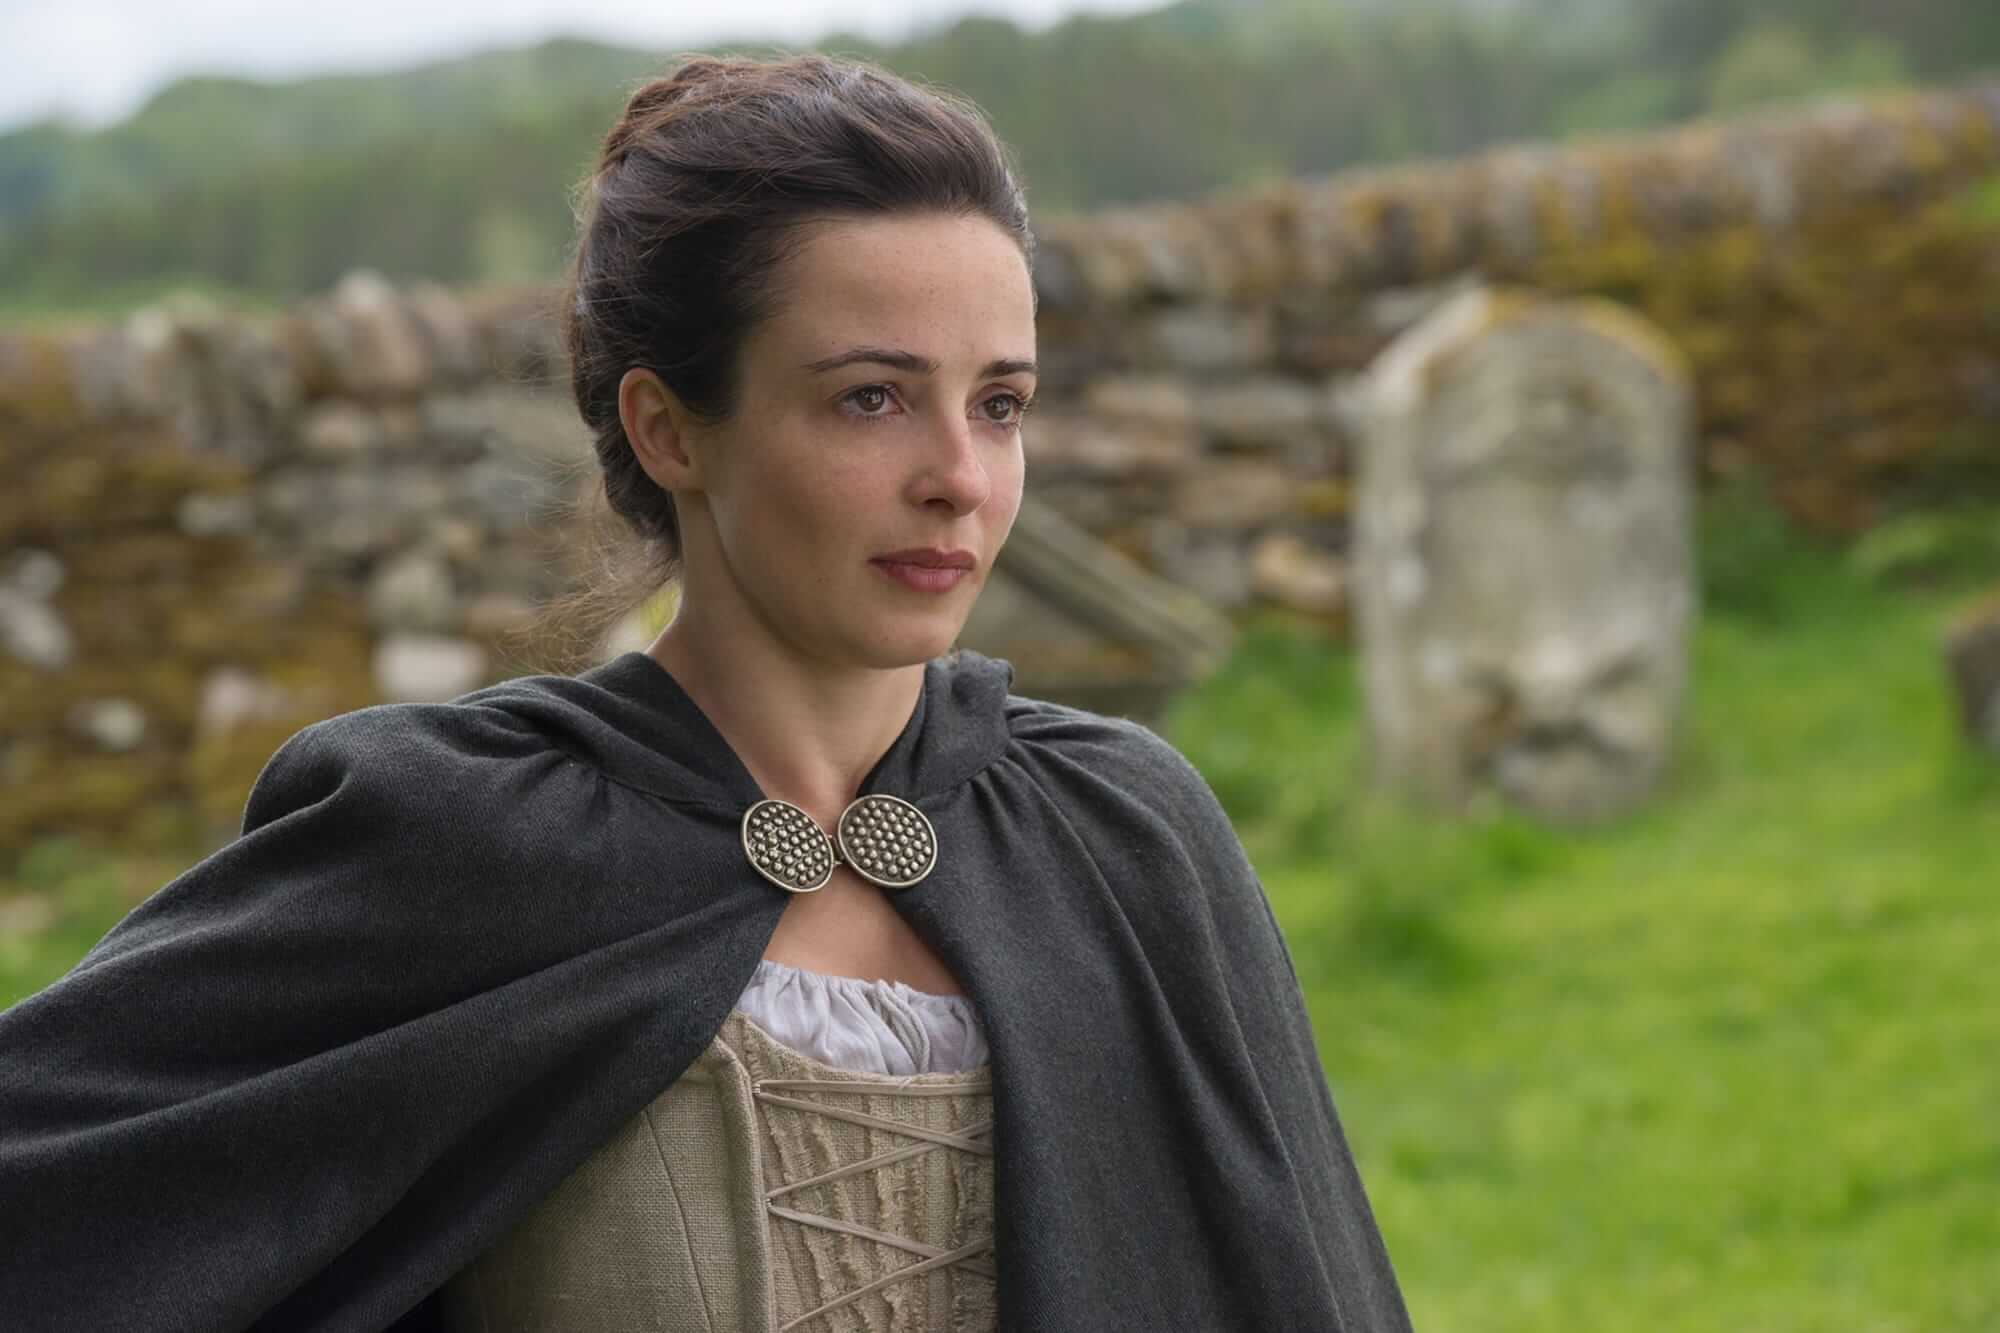 The Nevers star Laura Donnelly cast in Marvel halloween special